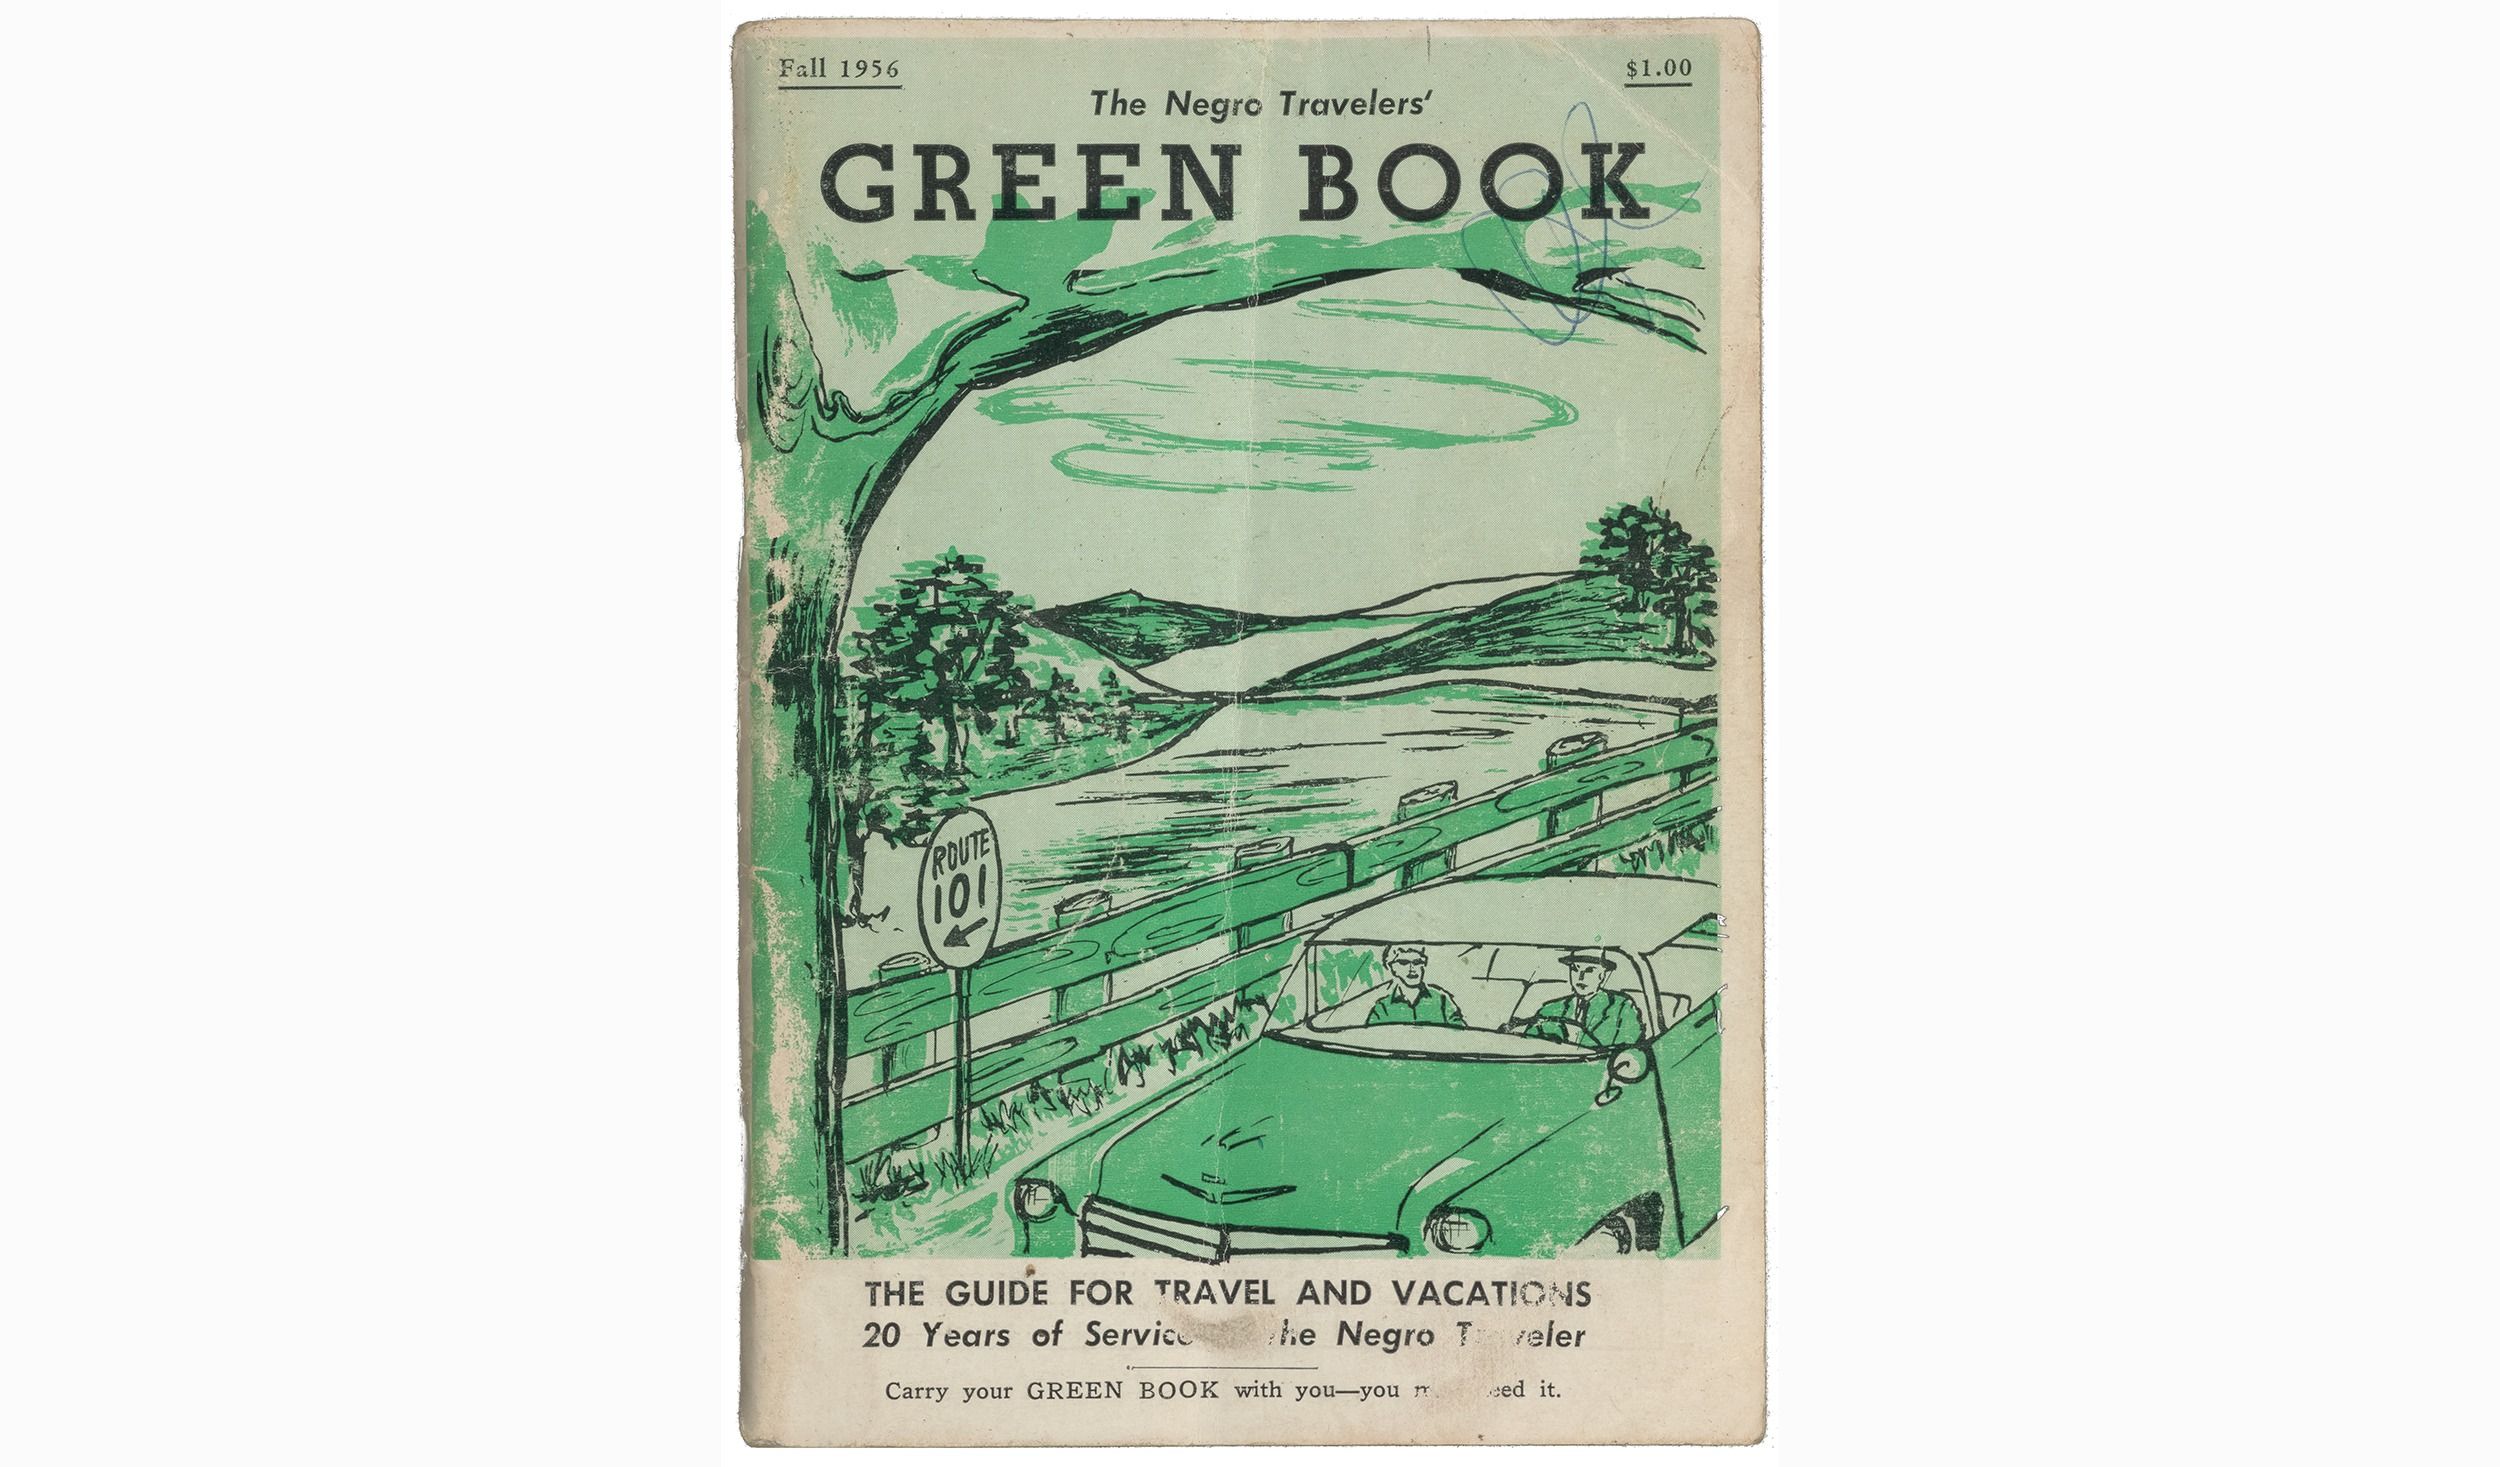 Cover of the Fall 1956 Green Book